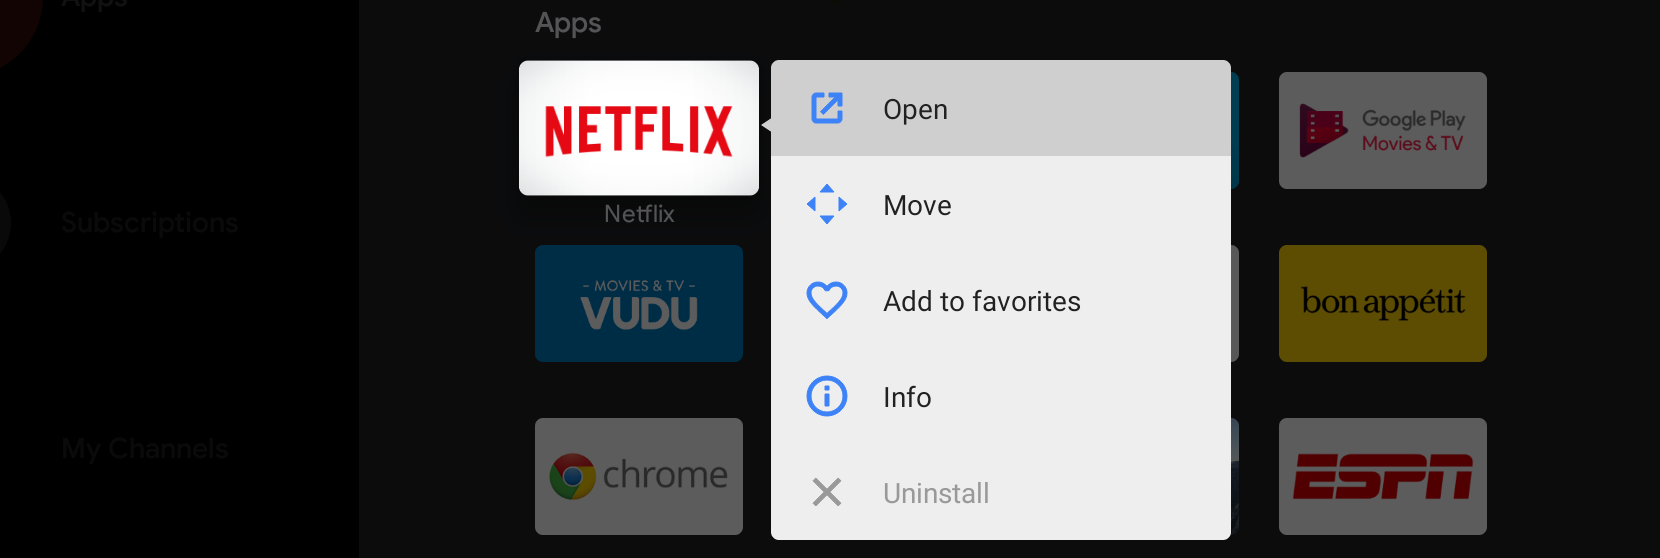 android tv can't uninstall some apps